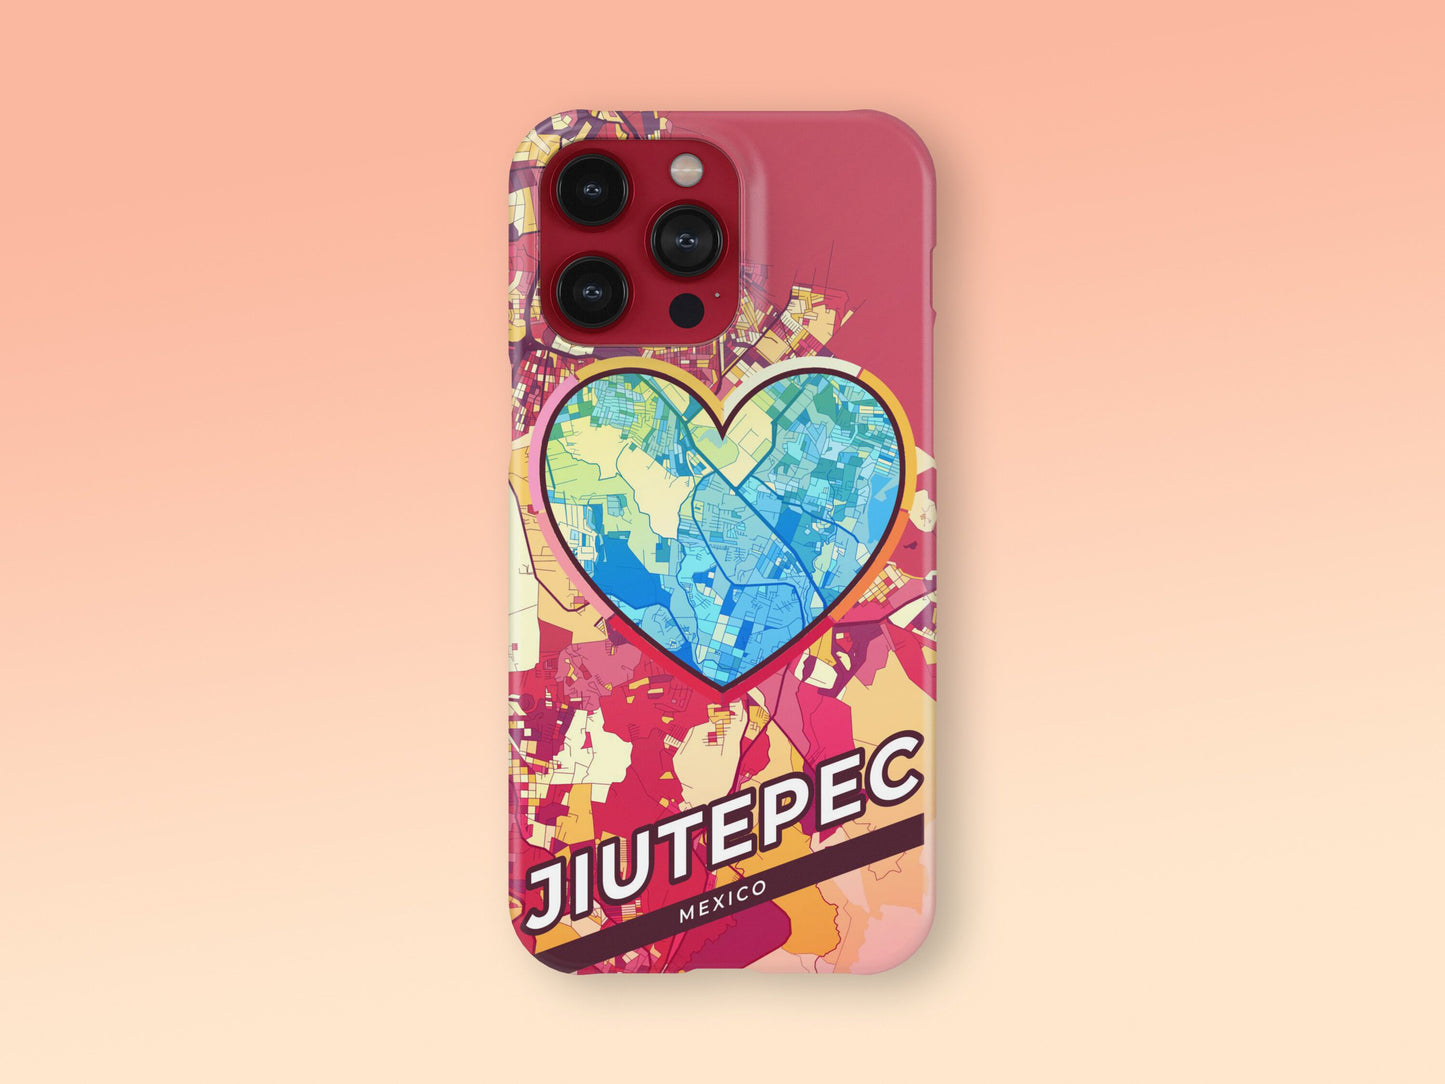 Jiutepec Mexico slim phone case with colorful icon. Birthday, wedding or housewarming gift. Couple match cases. 2